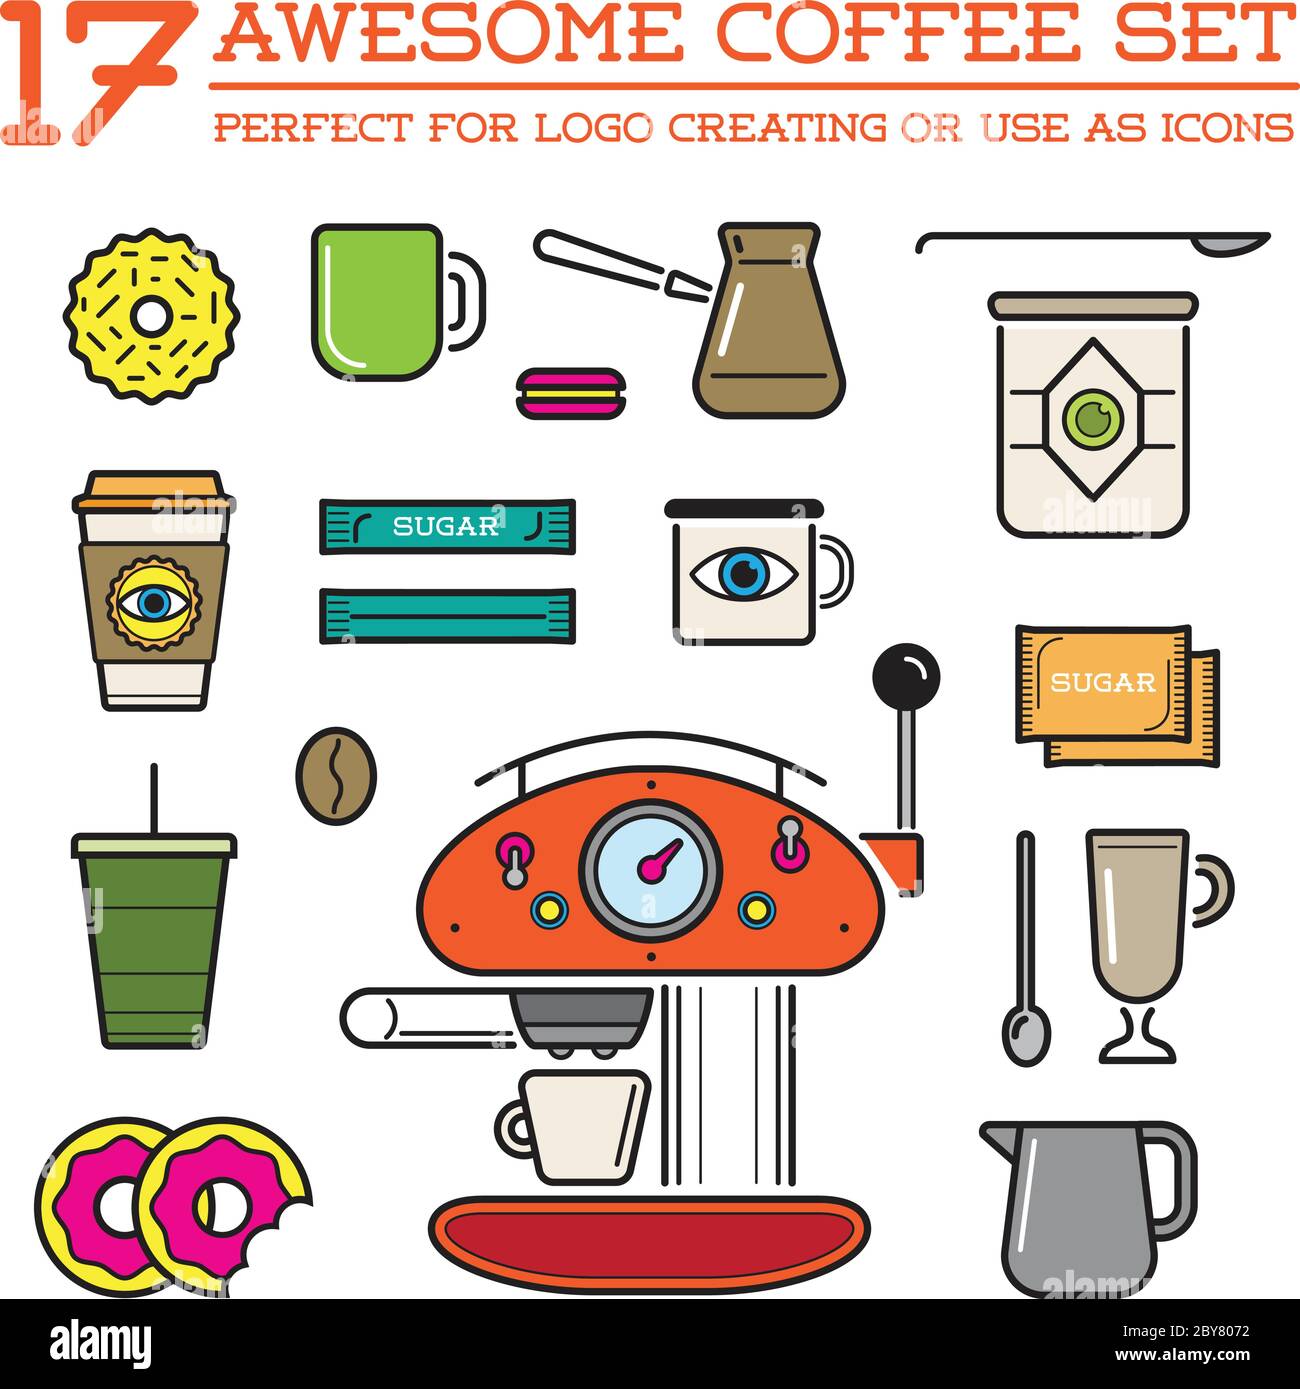 https://c8.alamy.com/comp/2BY8072/set-of-vector-coffee-elements-and-coffee-accessories-illustration-can-be-used-as-logo-or-icon-in-premium-quality-2BY8072.jpg